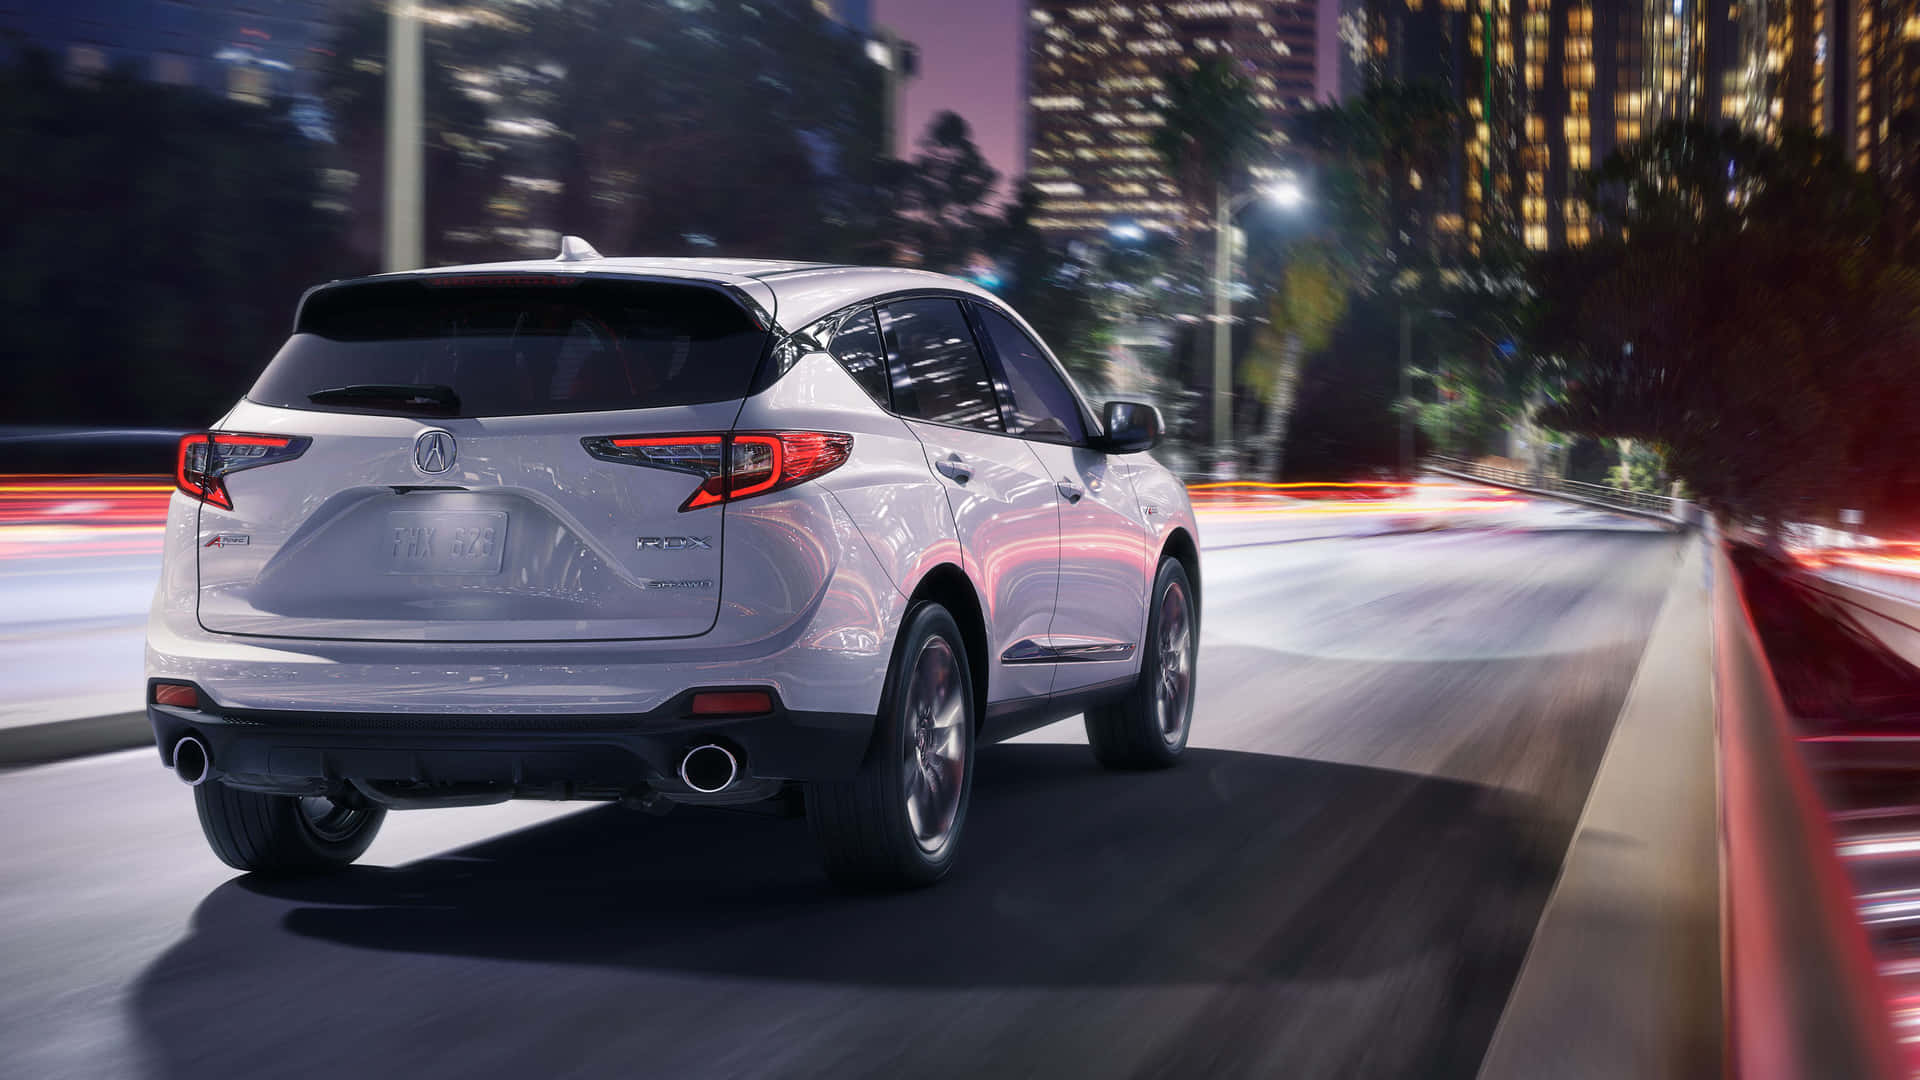 Captivating Acura RDX on an Open Road Wallpaper